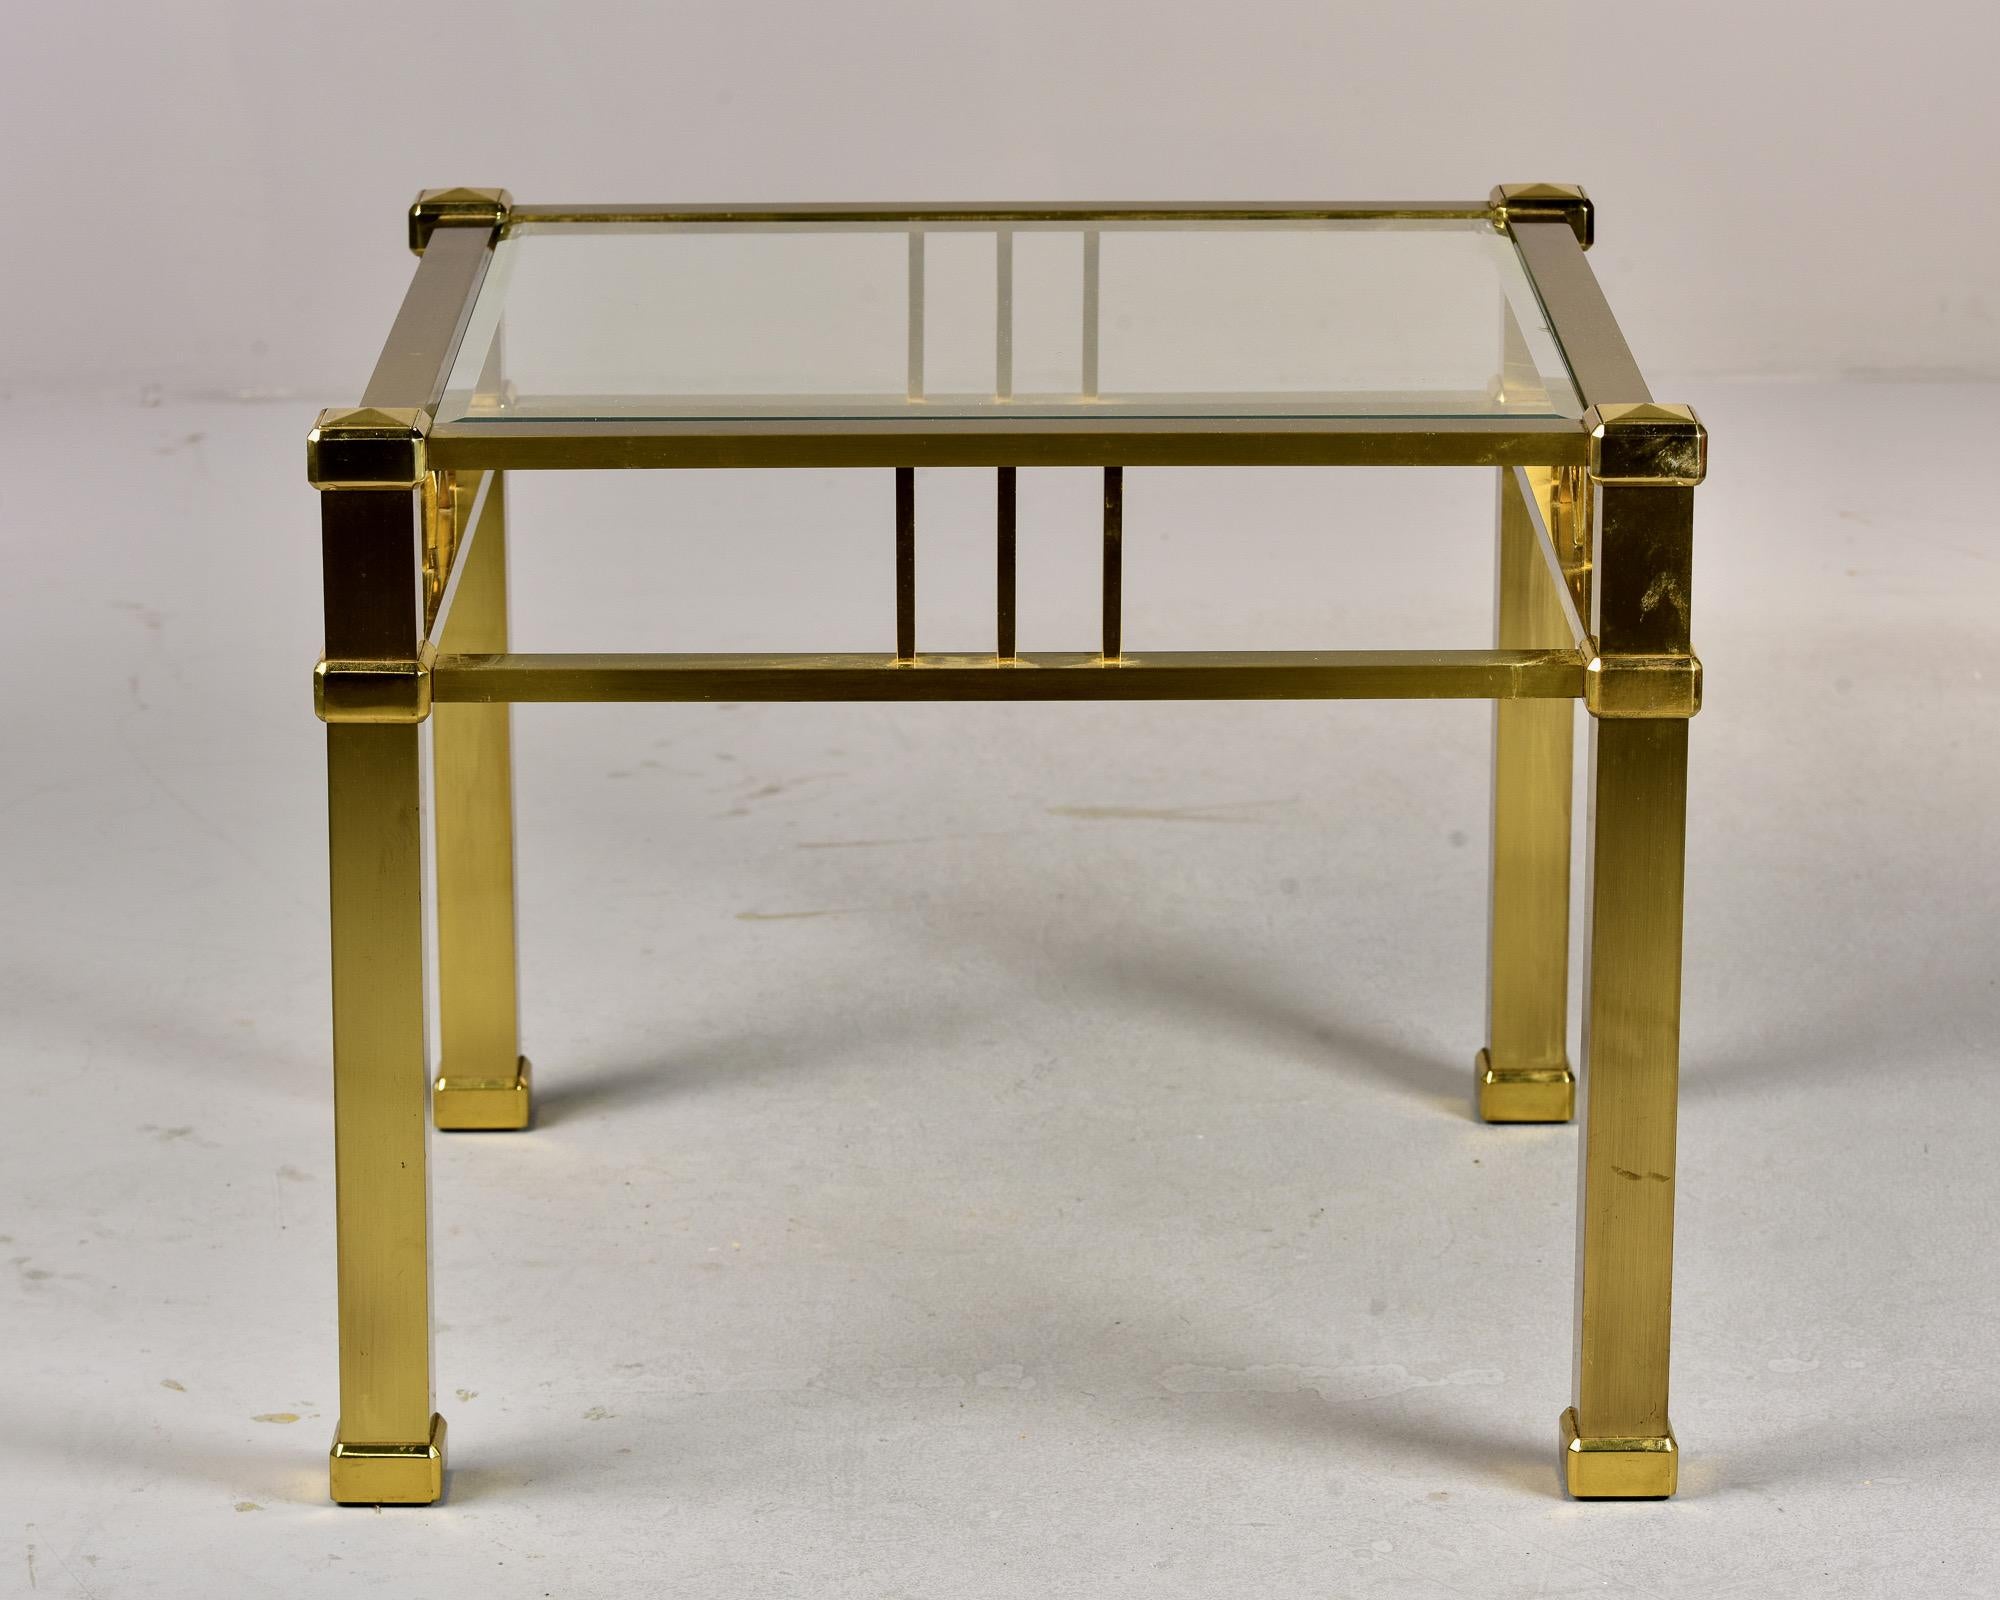 Circa 1970s French cocktail table made of solid brass with a glass top. Unknown maker. Very good vintage condition with some patina and surface wear.